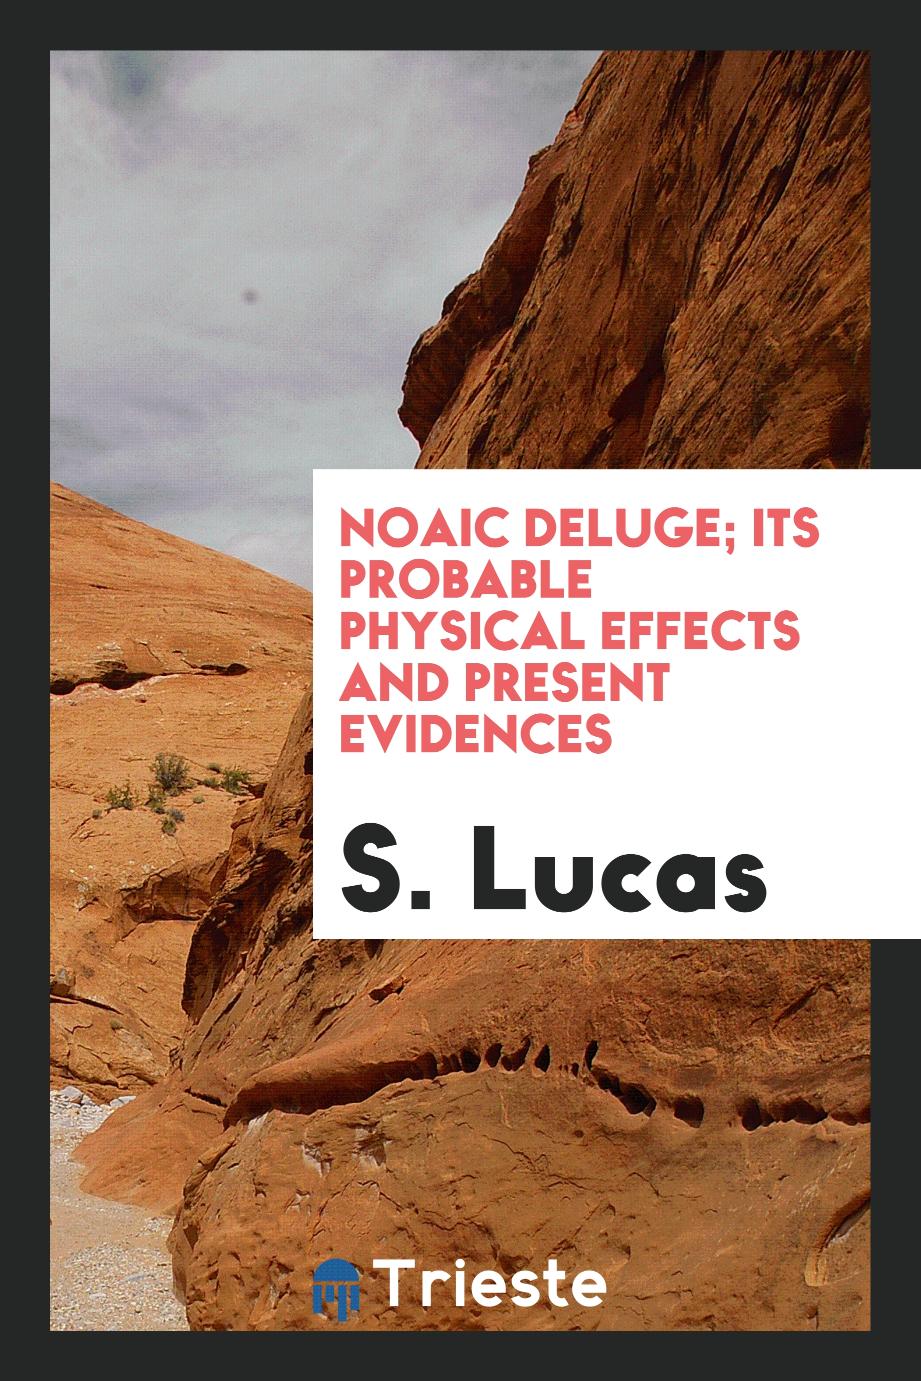 Noaic deluge; its probable physical effects and present evidences